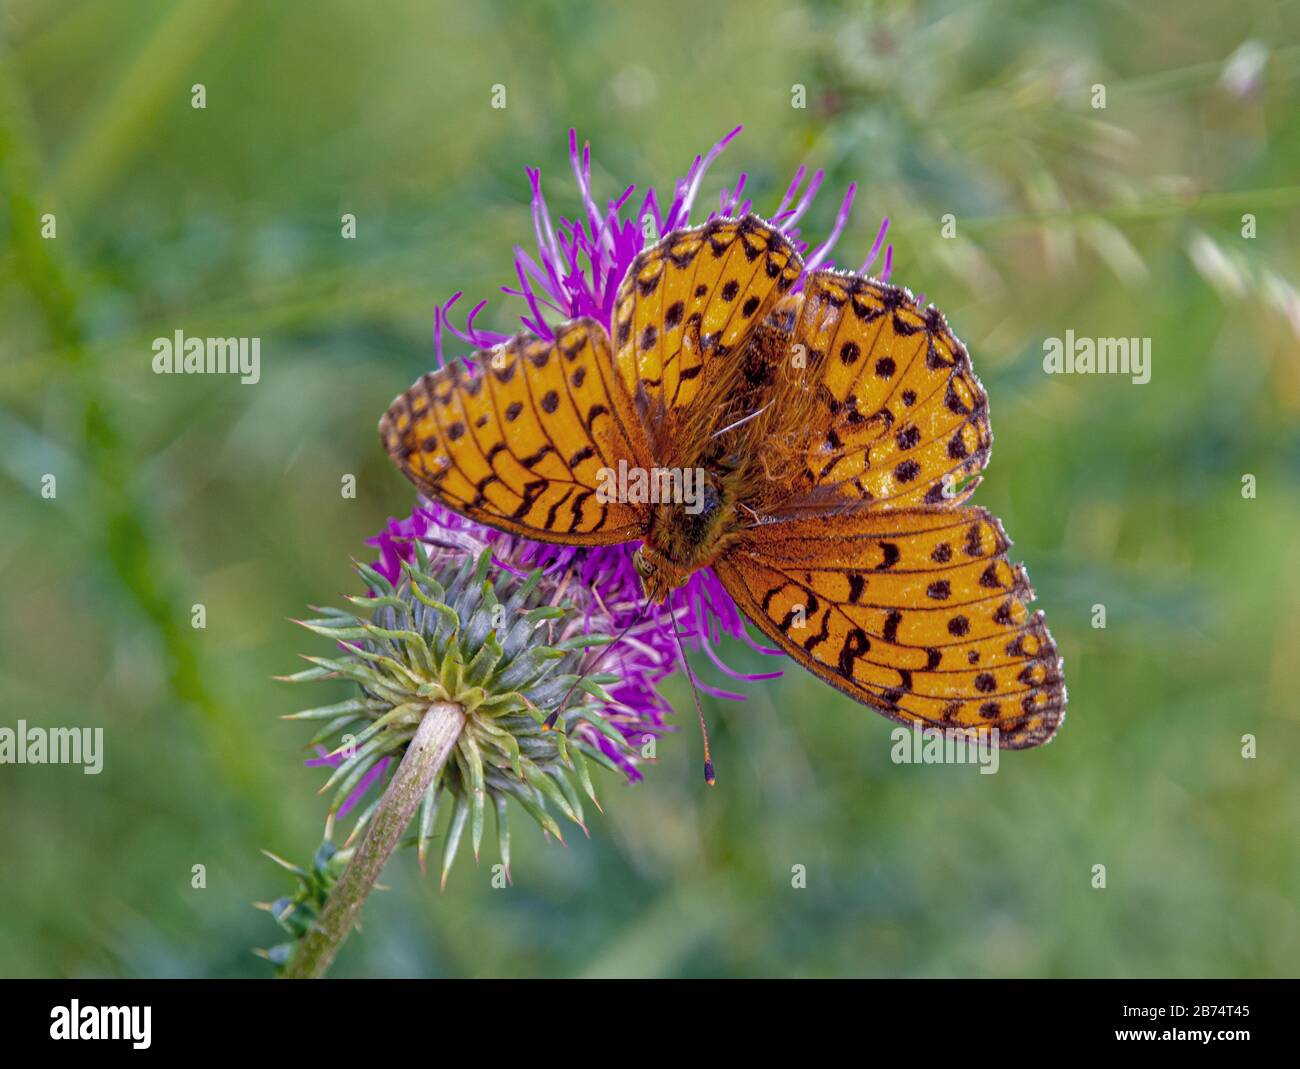 silver-washed fritillary (Argynnis paphia) butterfly basking on a mountain cornflower Stock Photo